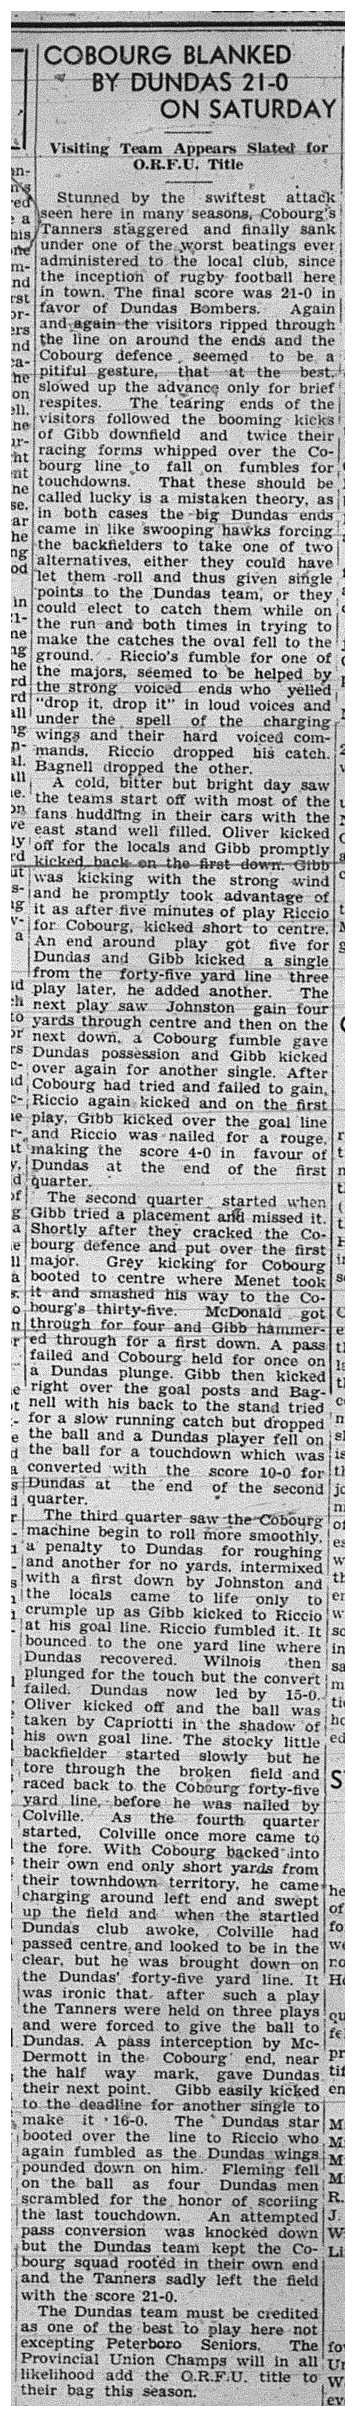 1939-11-02 Football -Cobourg Tanners lose to Dundas